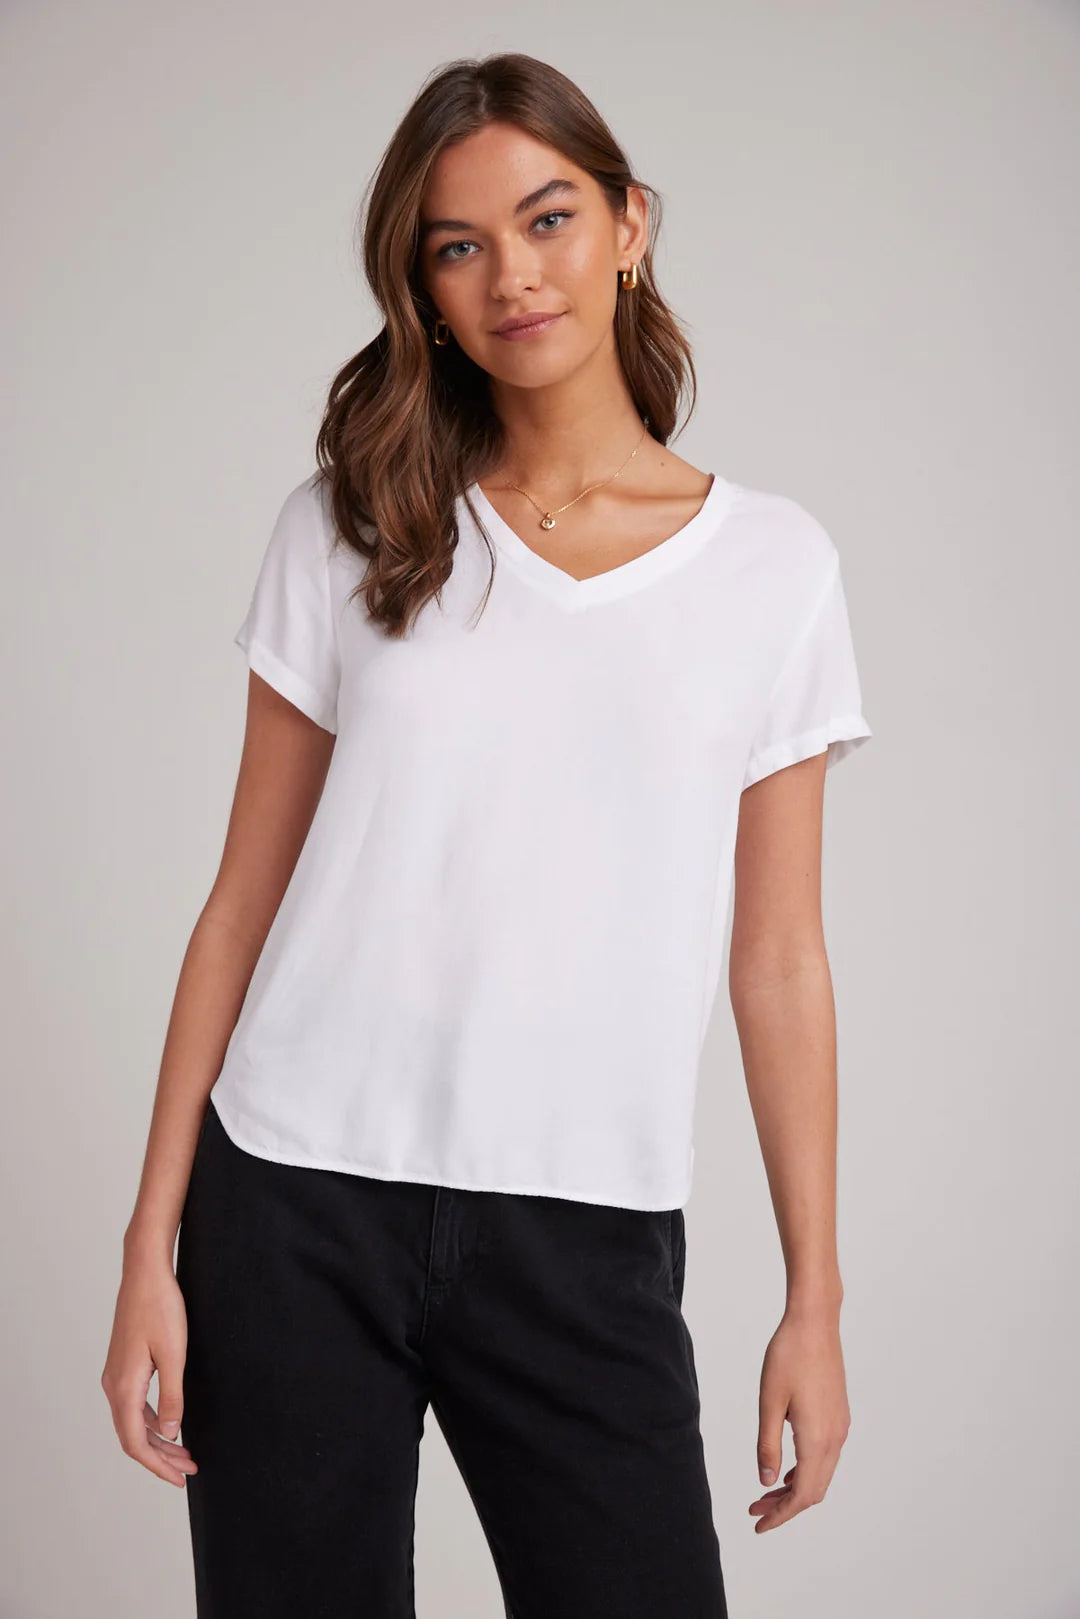 Load image into Gallery viewer, V-Neck Tee
